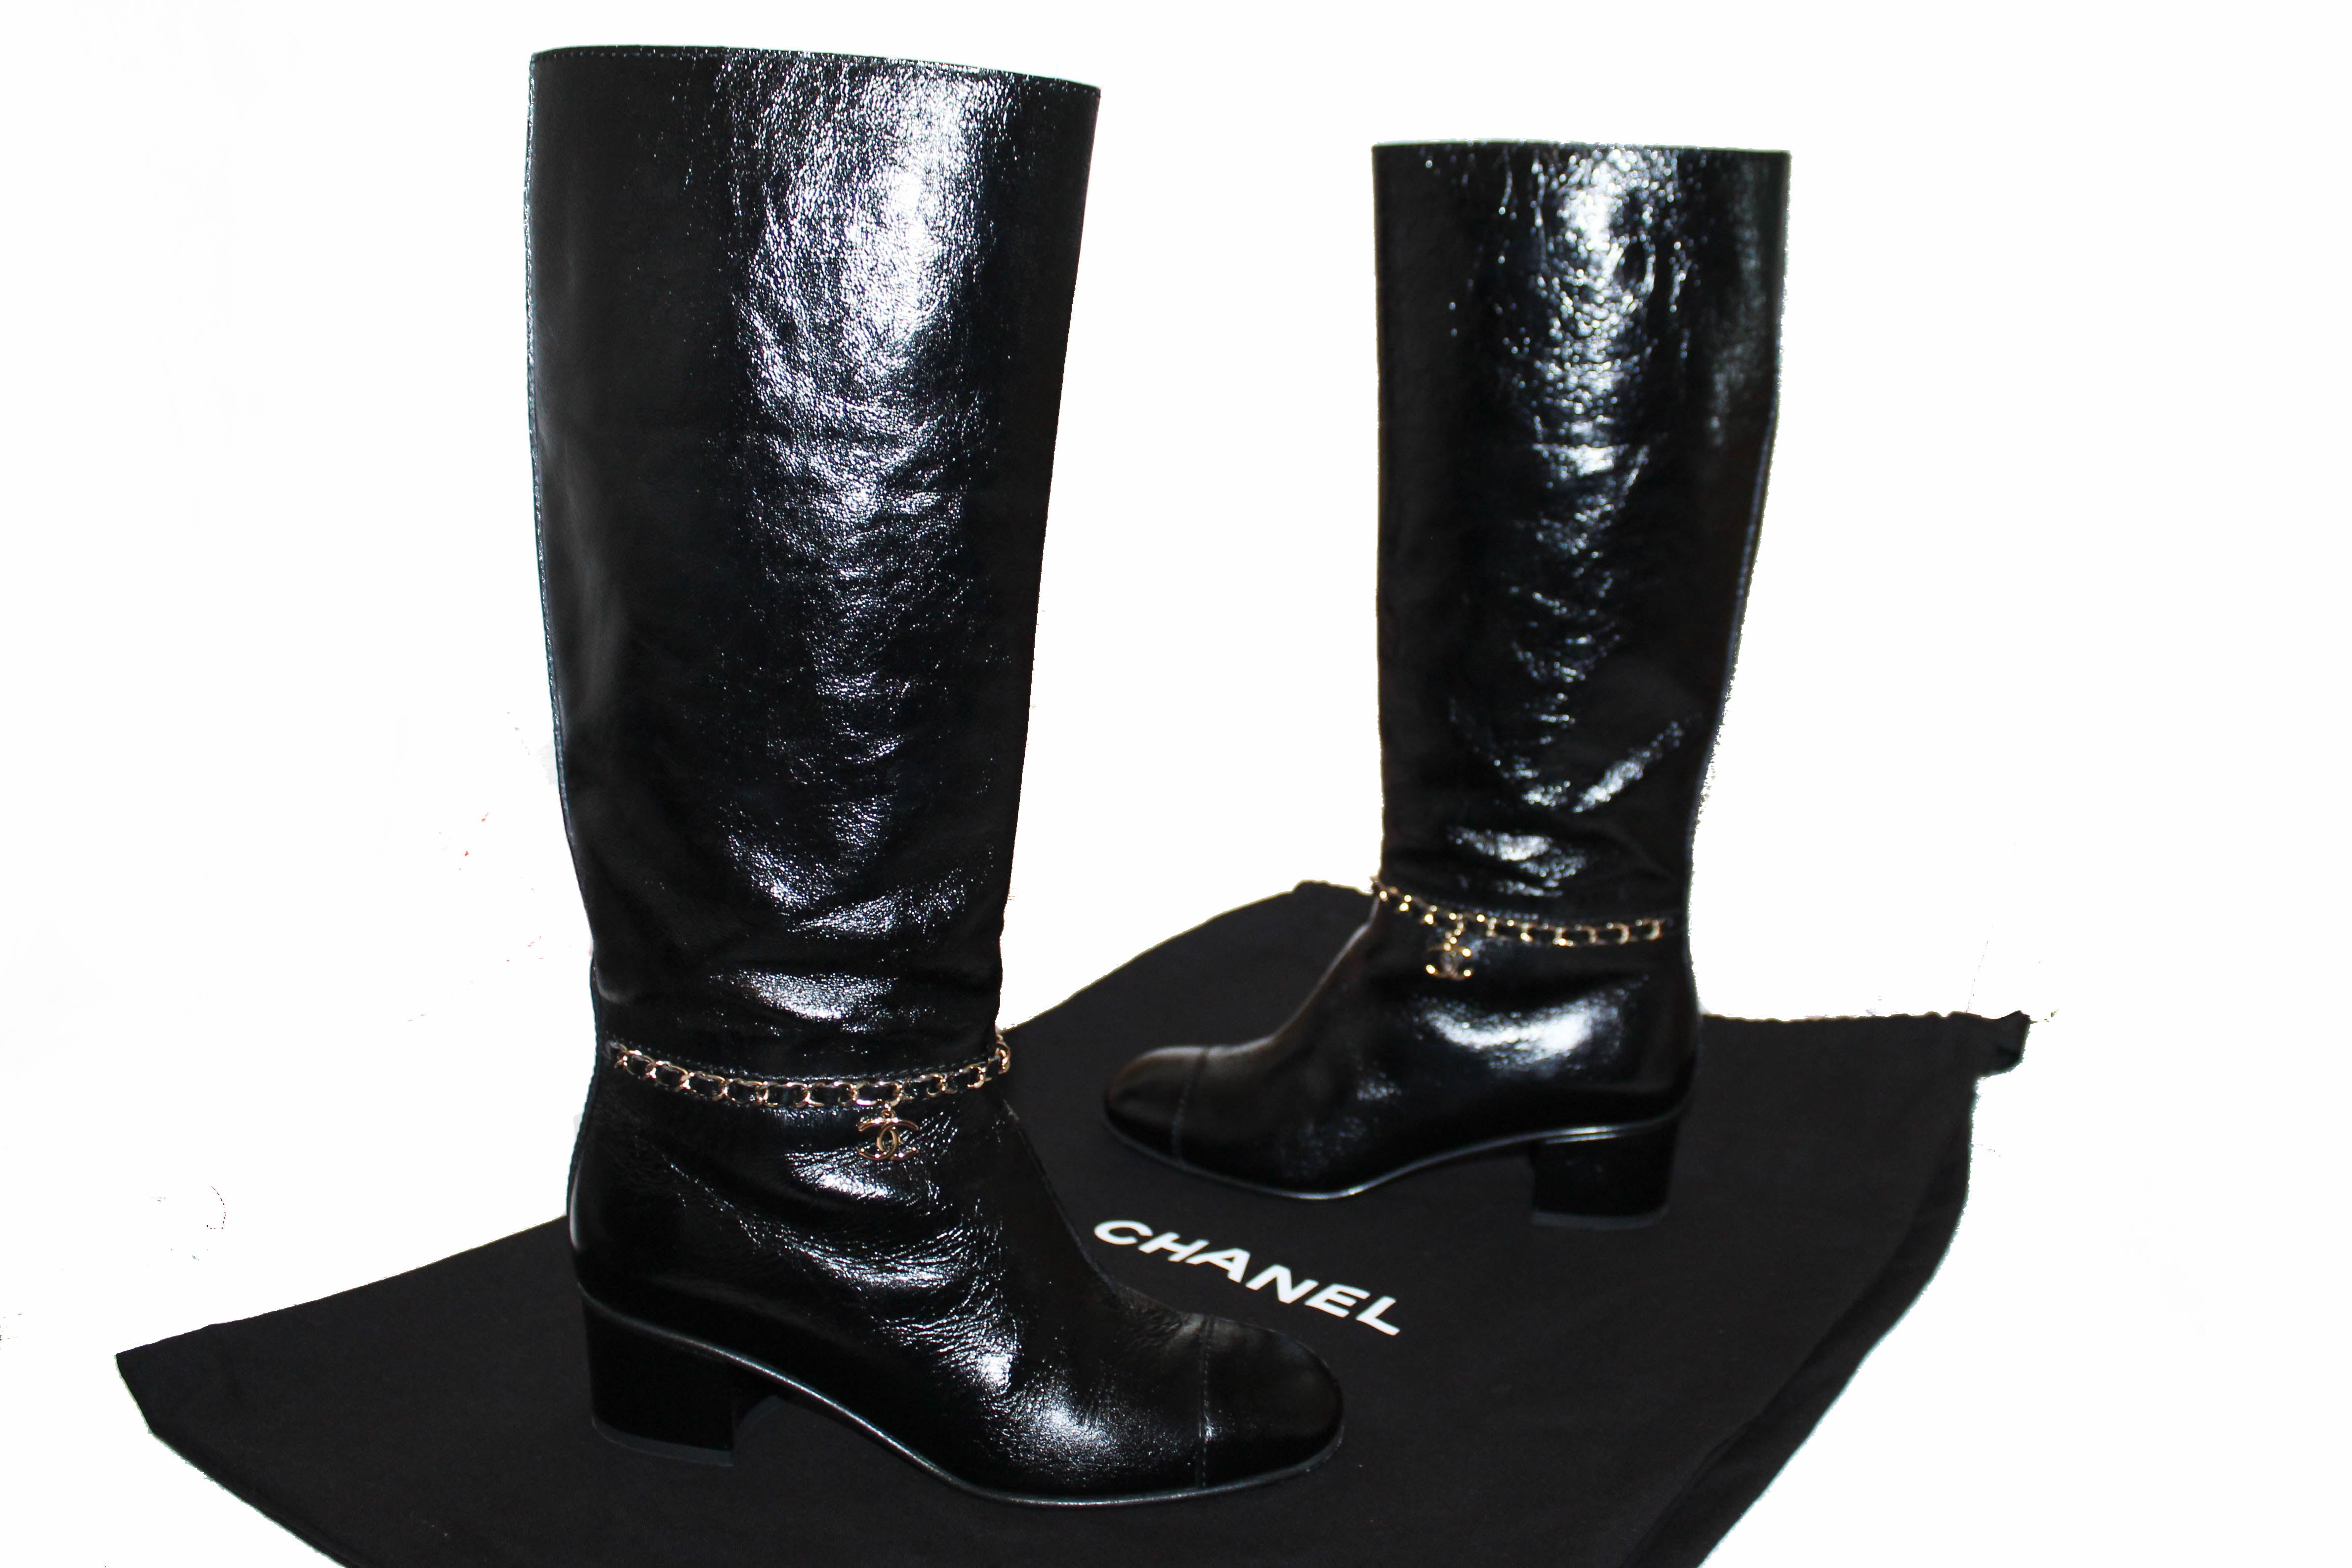 Chanel Black leather and chain thigh-high boots with integrated gaiters,  €2,500.